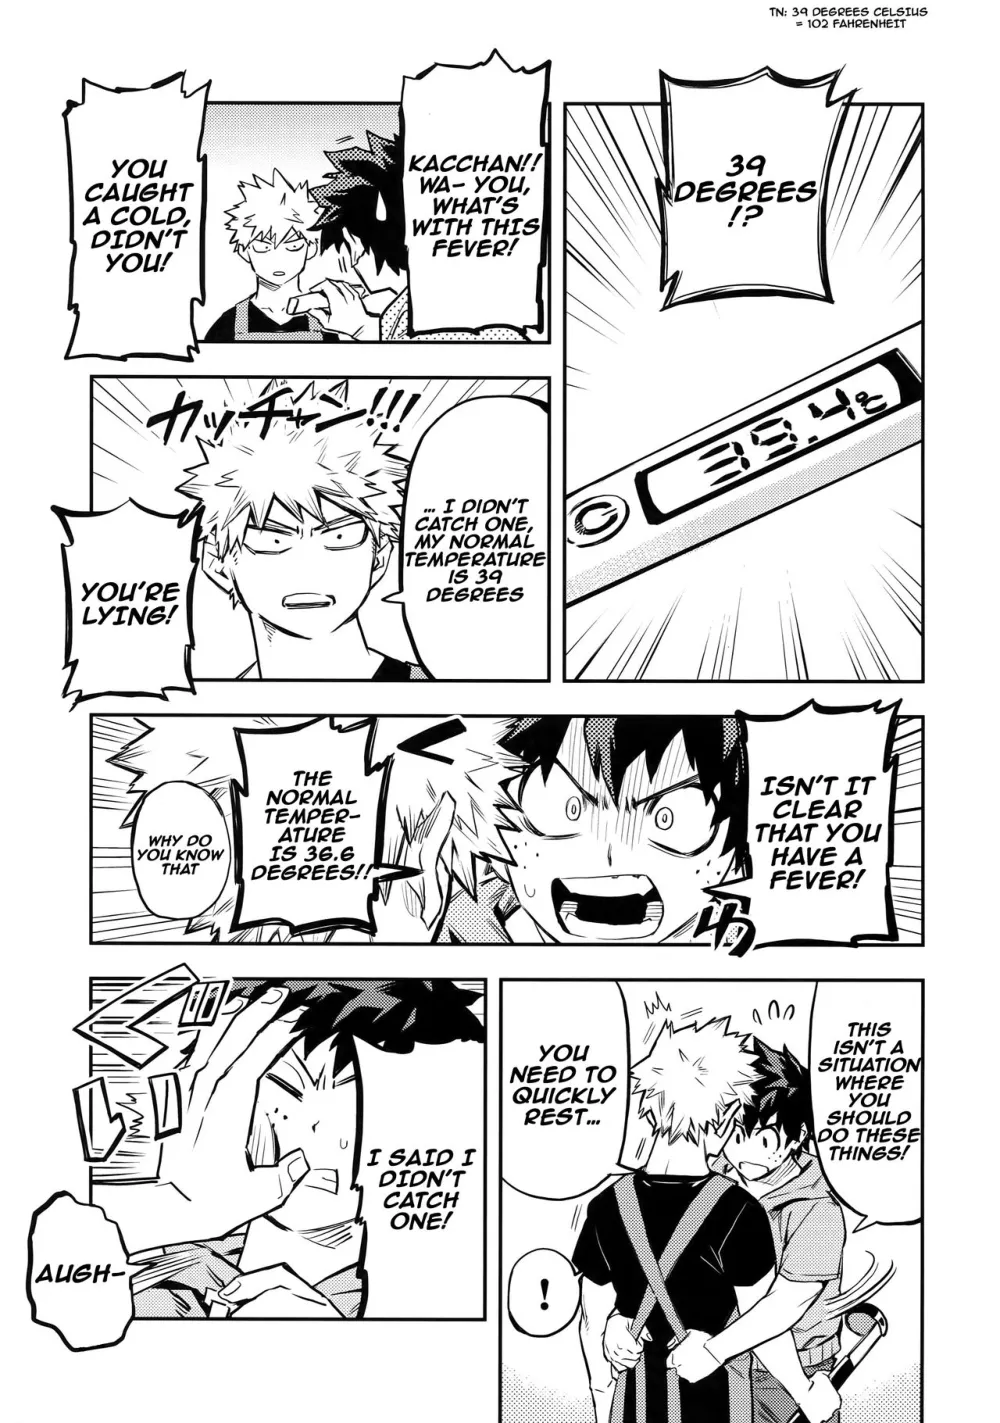 The Battle Between Sick Kacchan and Me - Page 6